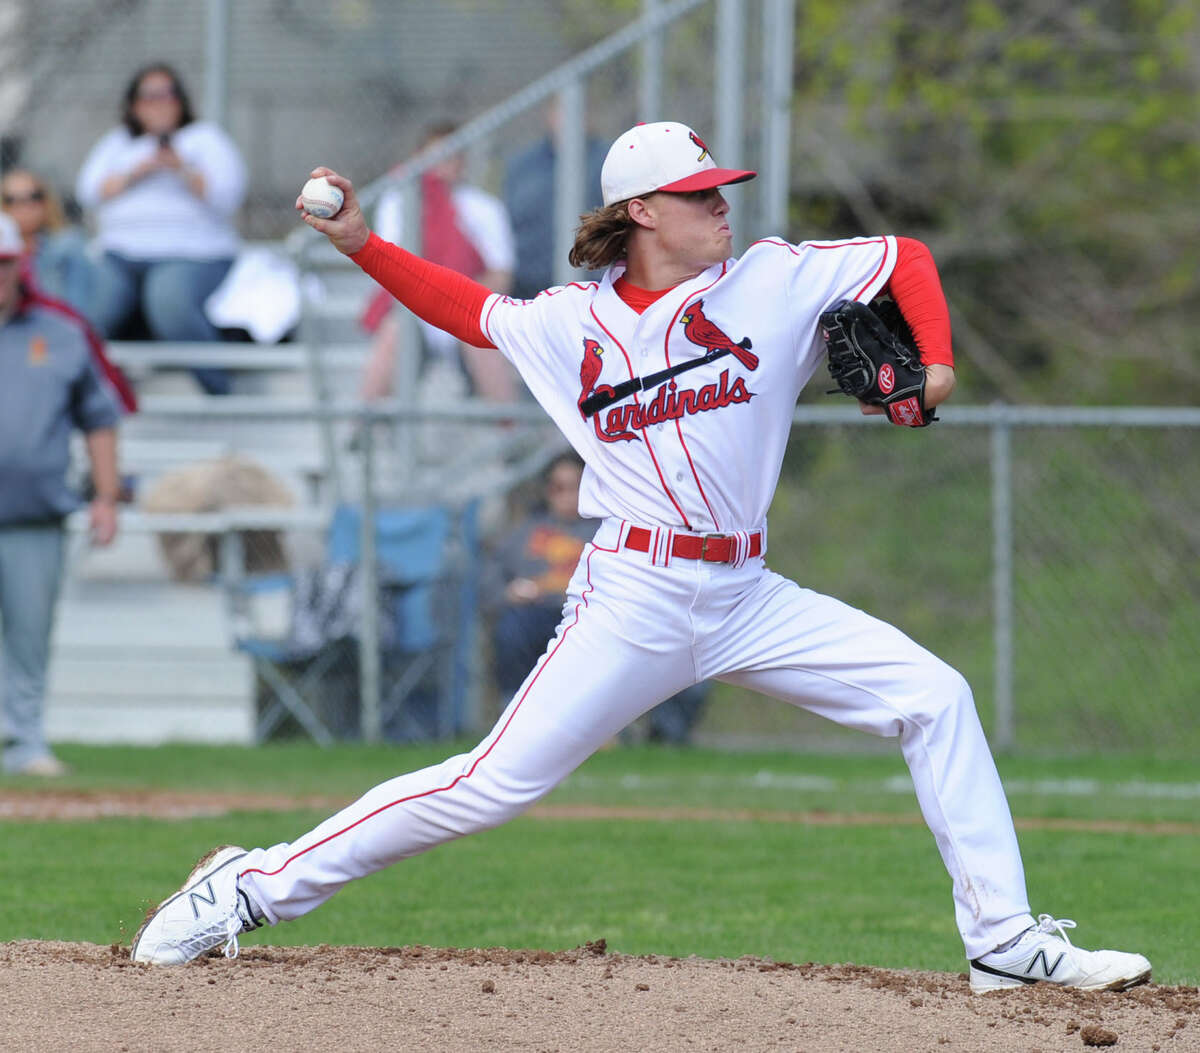 Greenwich pitcher Kyle Dunster pitched seven-plus innings of two-run ball in a 6-2, eight-inning win over Staples in the FCIAC quarterfinals on Tuesday.